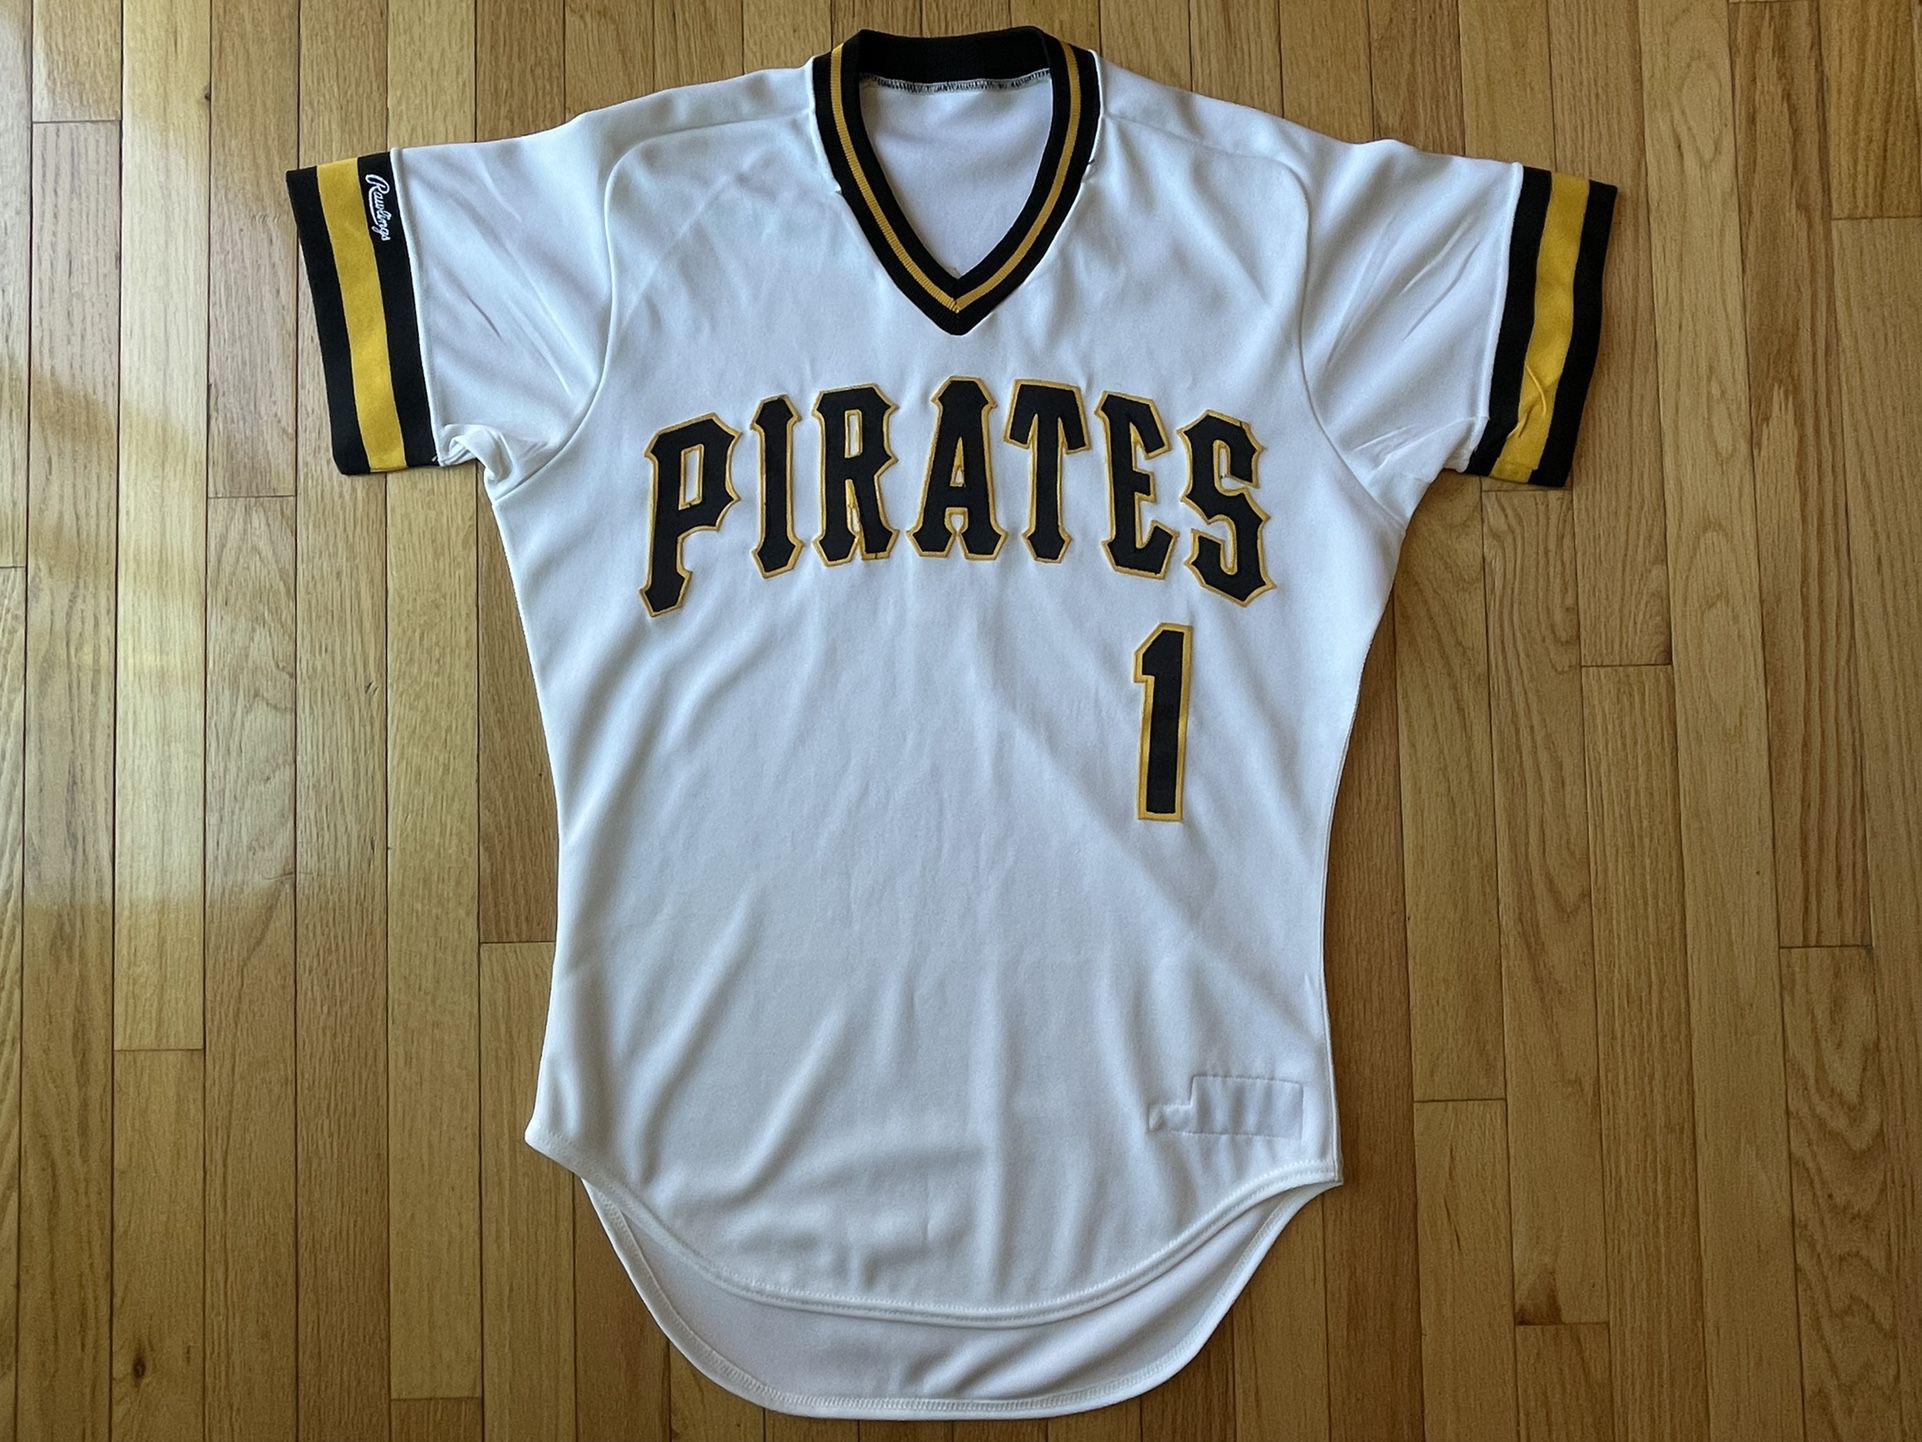 1987 Authentic Rawlings Pittsburgh Pirates Game Issued Baseball Jersey Size 40